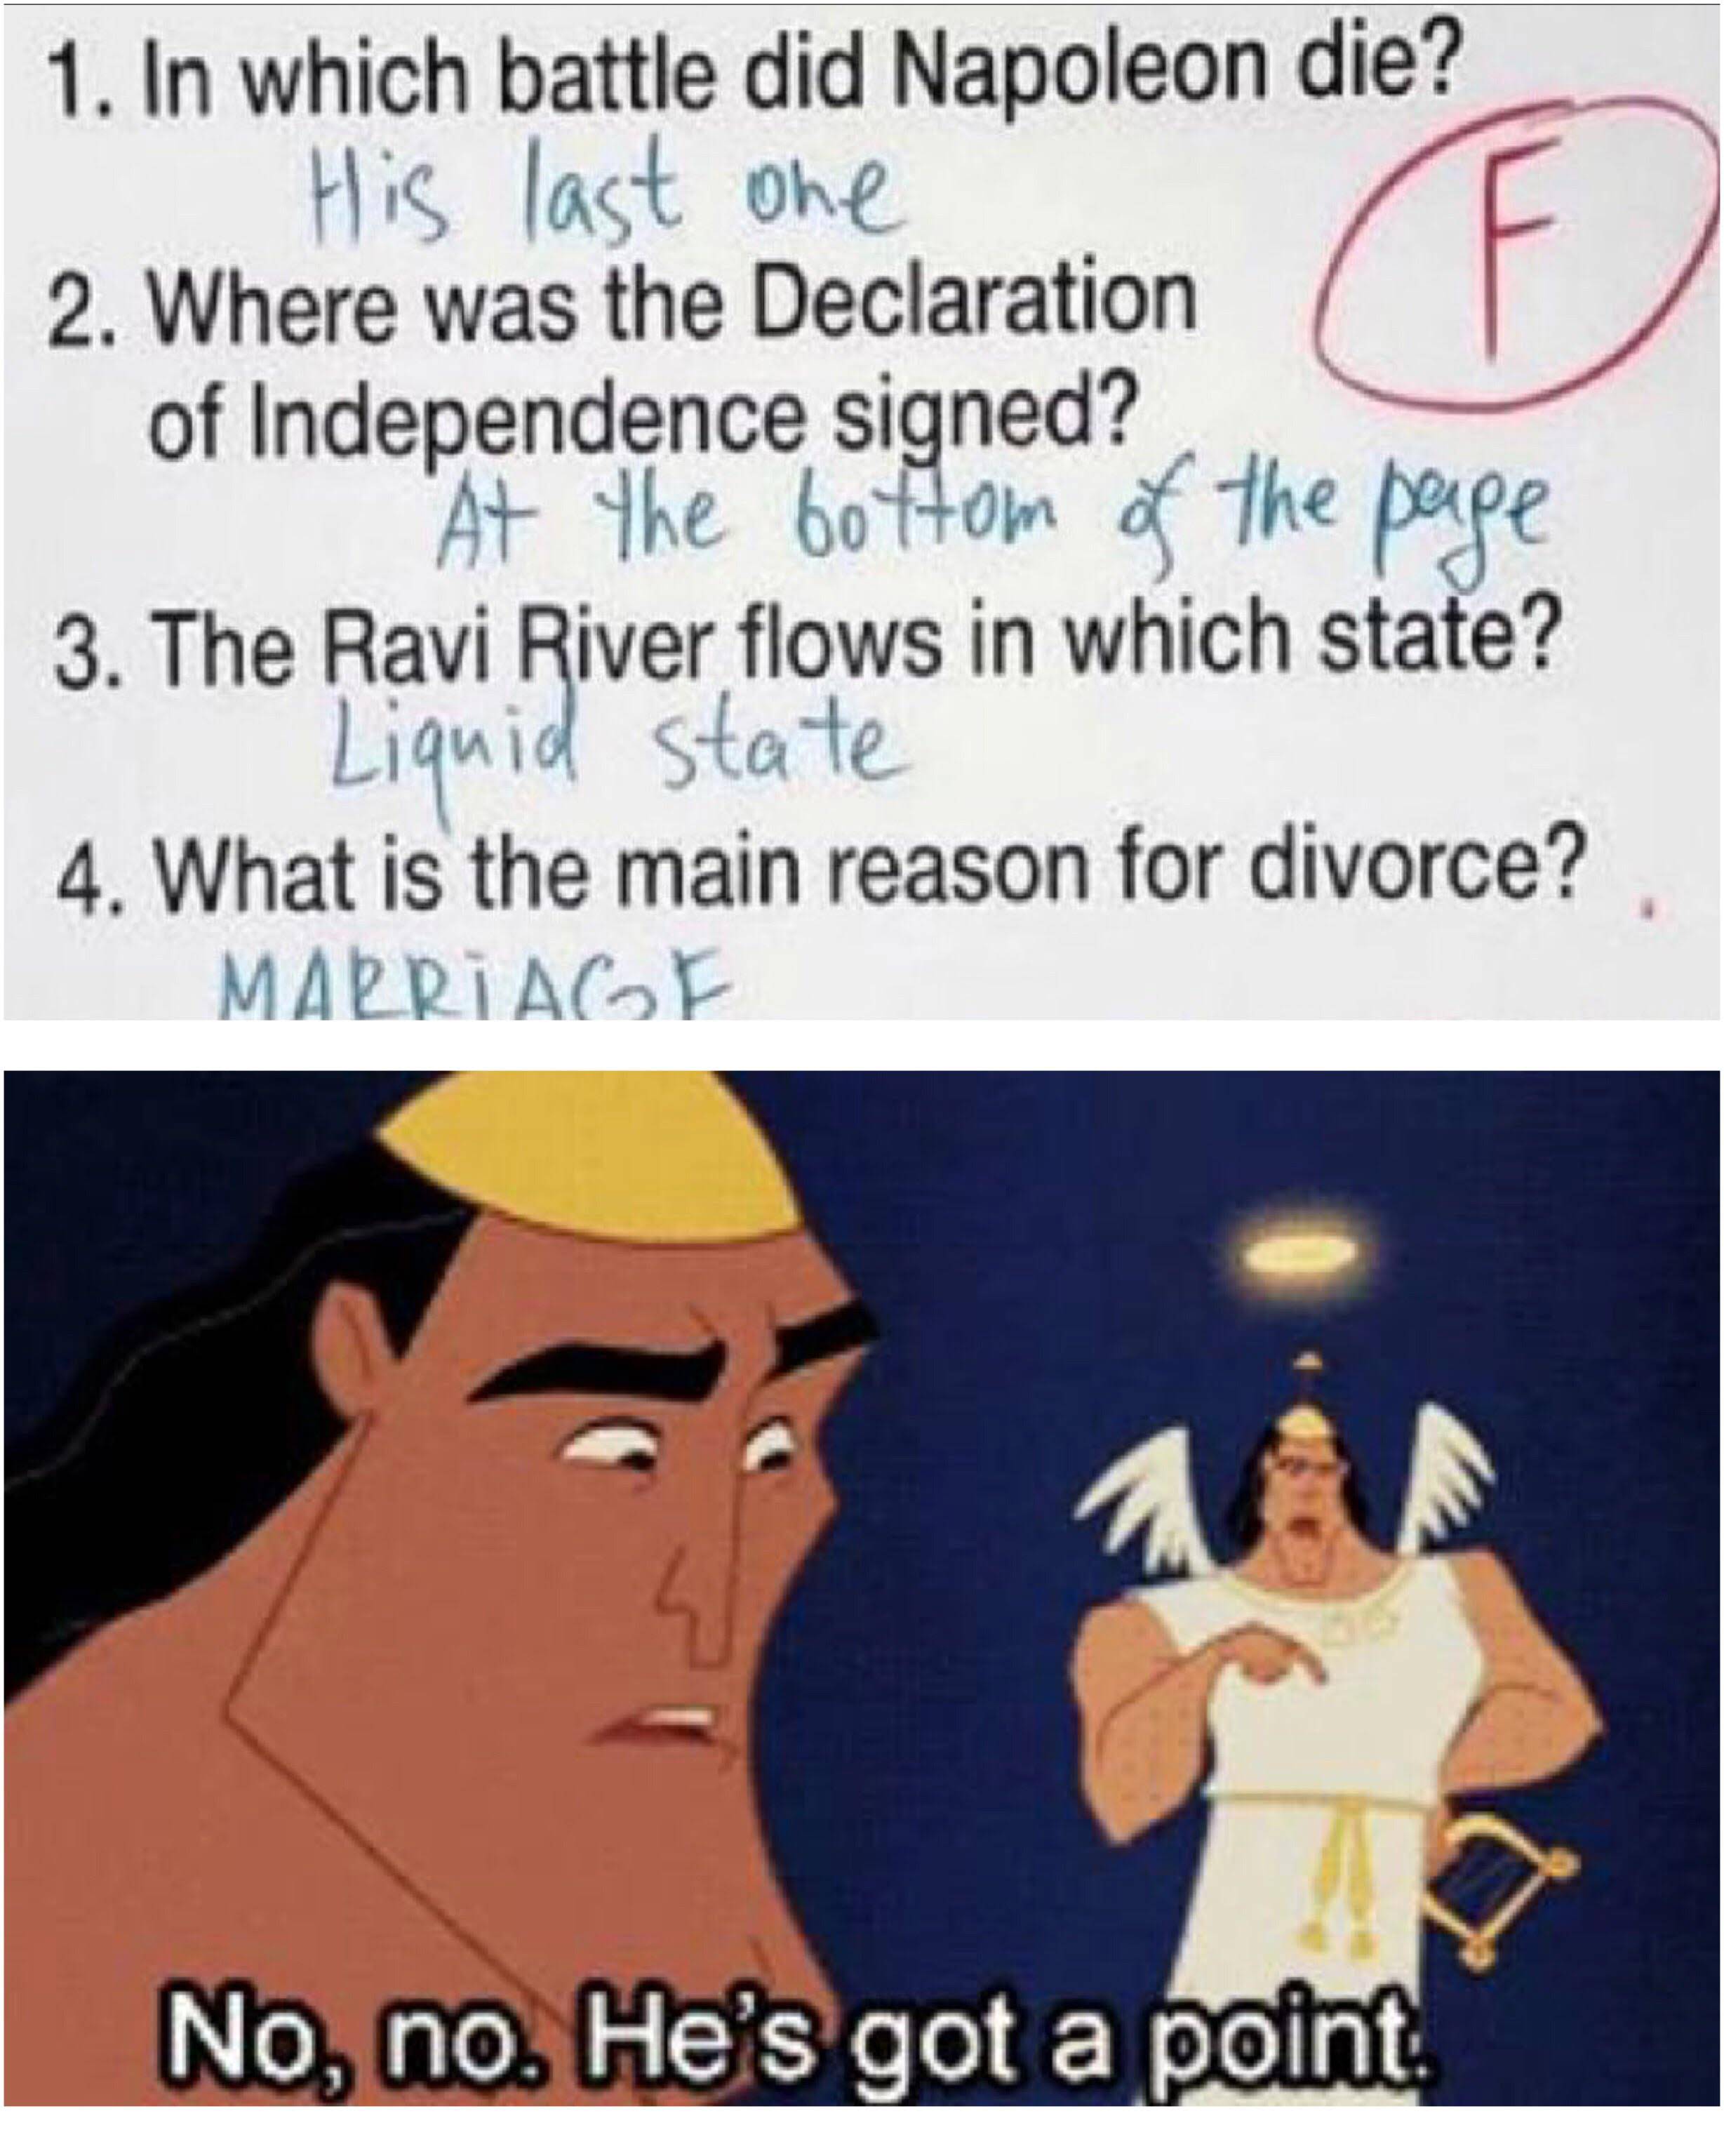 no no he's got a point meme - G 1. In which battle did Napoleon die? His last one 2. Where was the Declaration of Independence signed? " At the bottom of the page 3. The Ravi River flows in which state? Liquid state 4. What is the main reason for divorce?